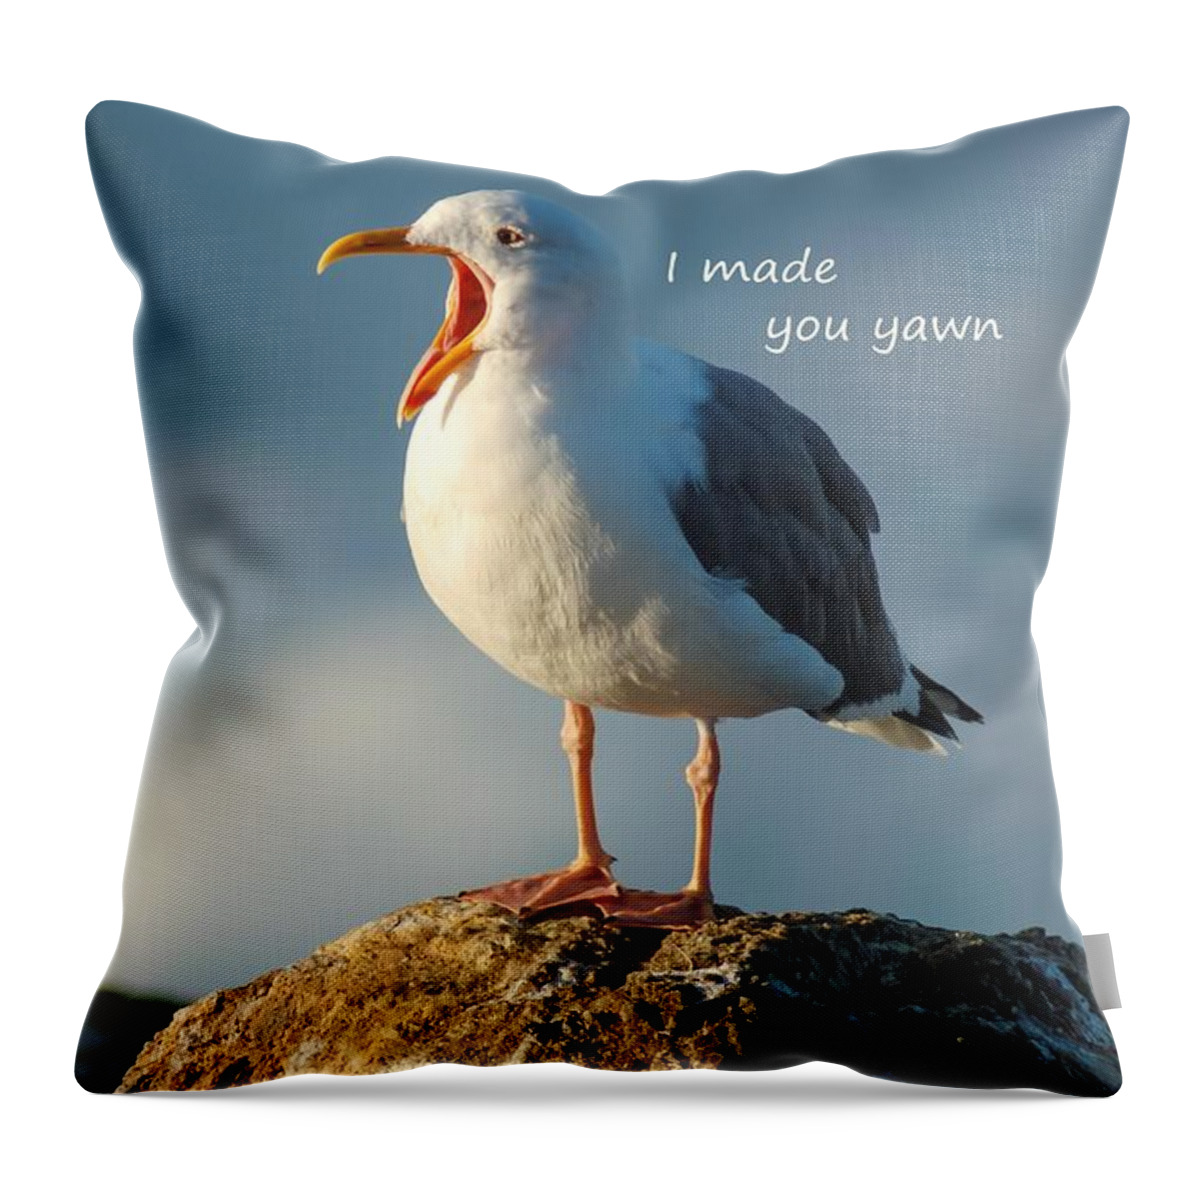 Yawn Throw Pillow featuring the photograph The Gull Said I made you Yawn by Sherry Clark